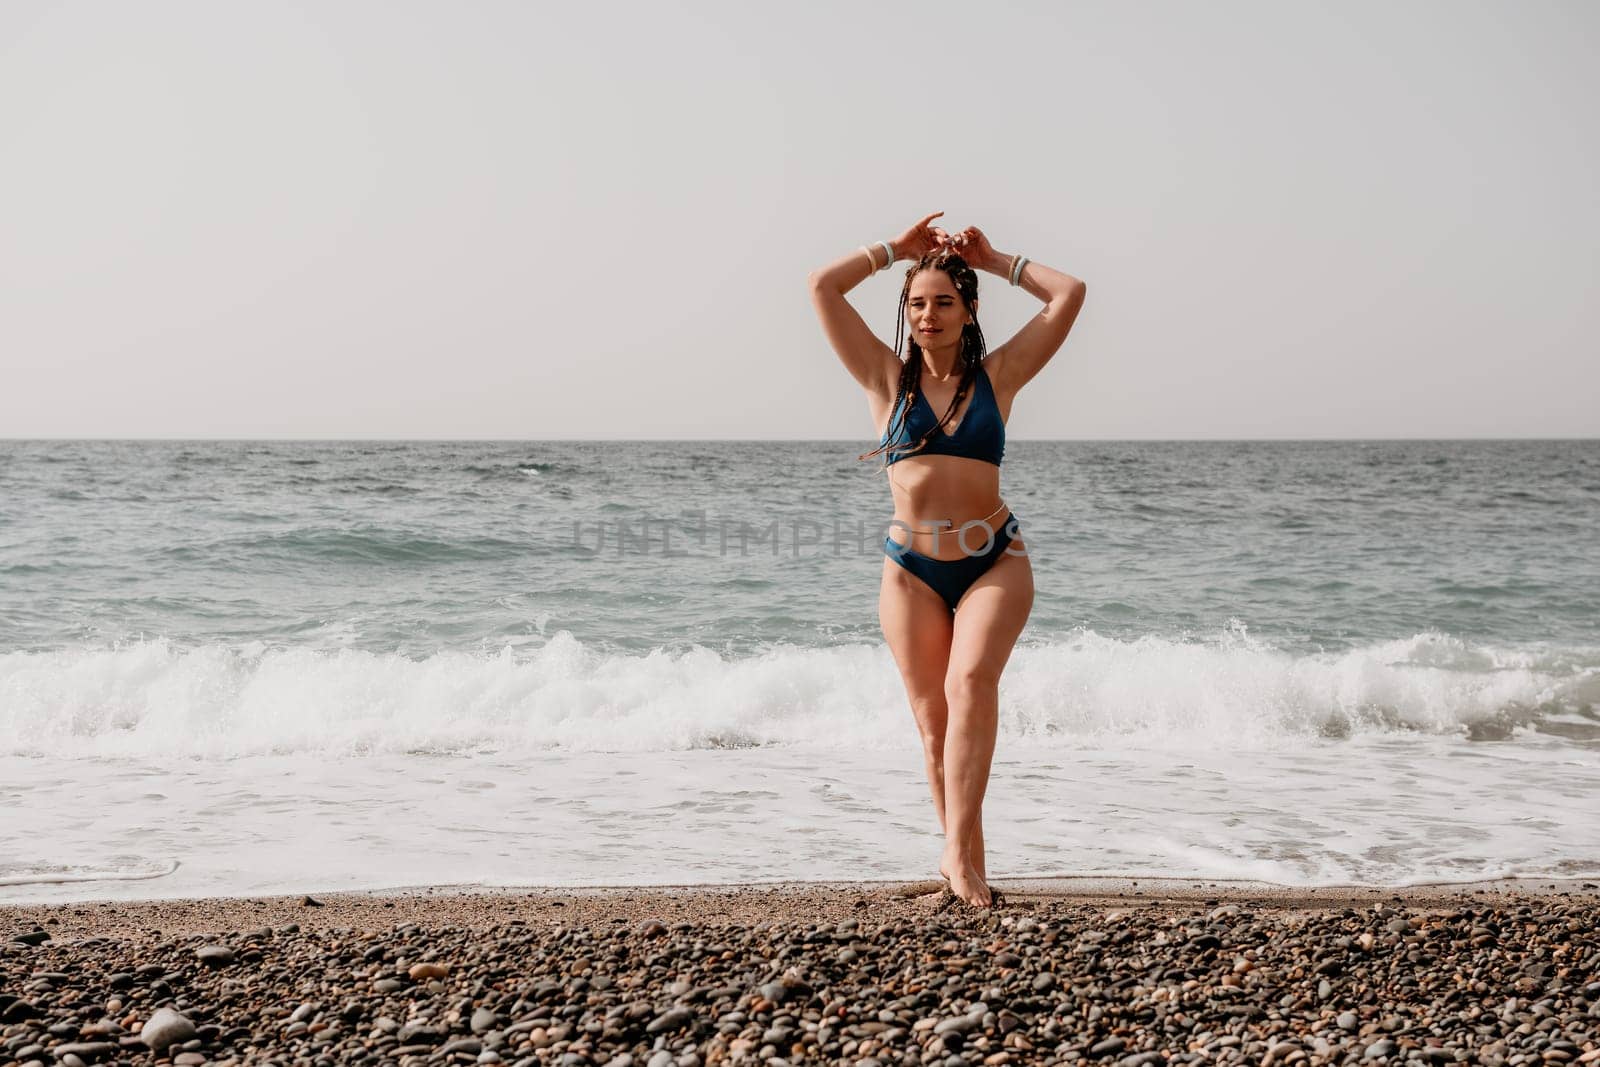 Beach vacation. Hot beautiful woman in sunhat and bikini standing with her arms raised to her head enjoying looking view of beach ocean on hot summer day.